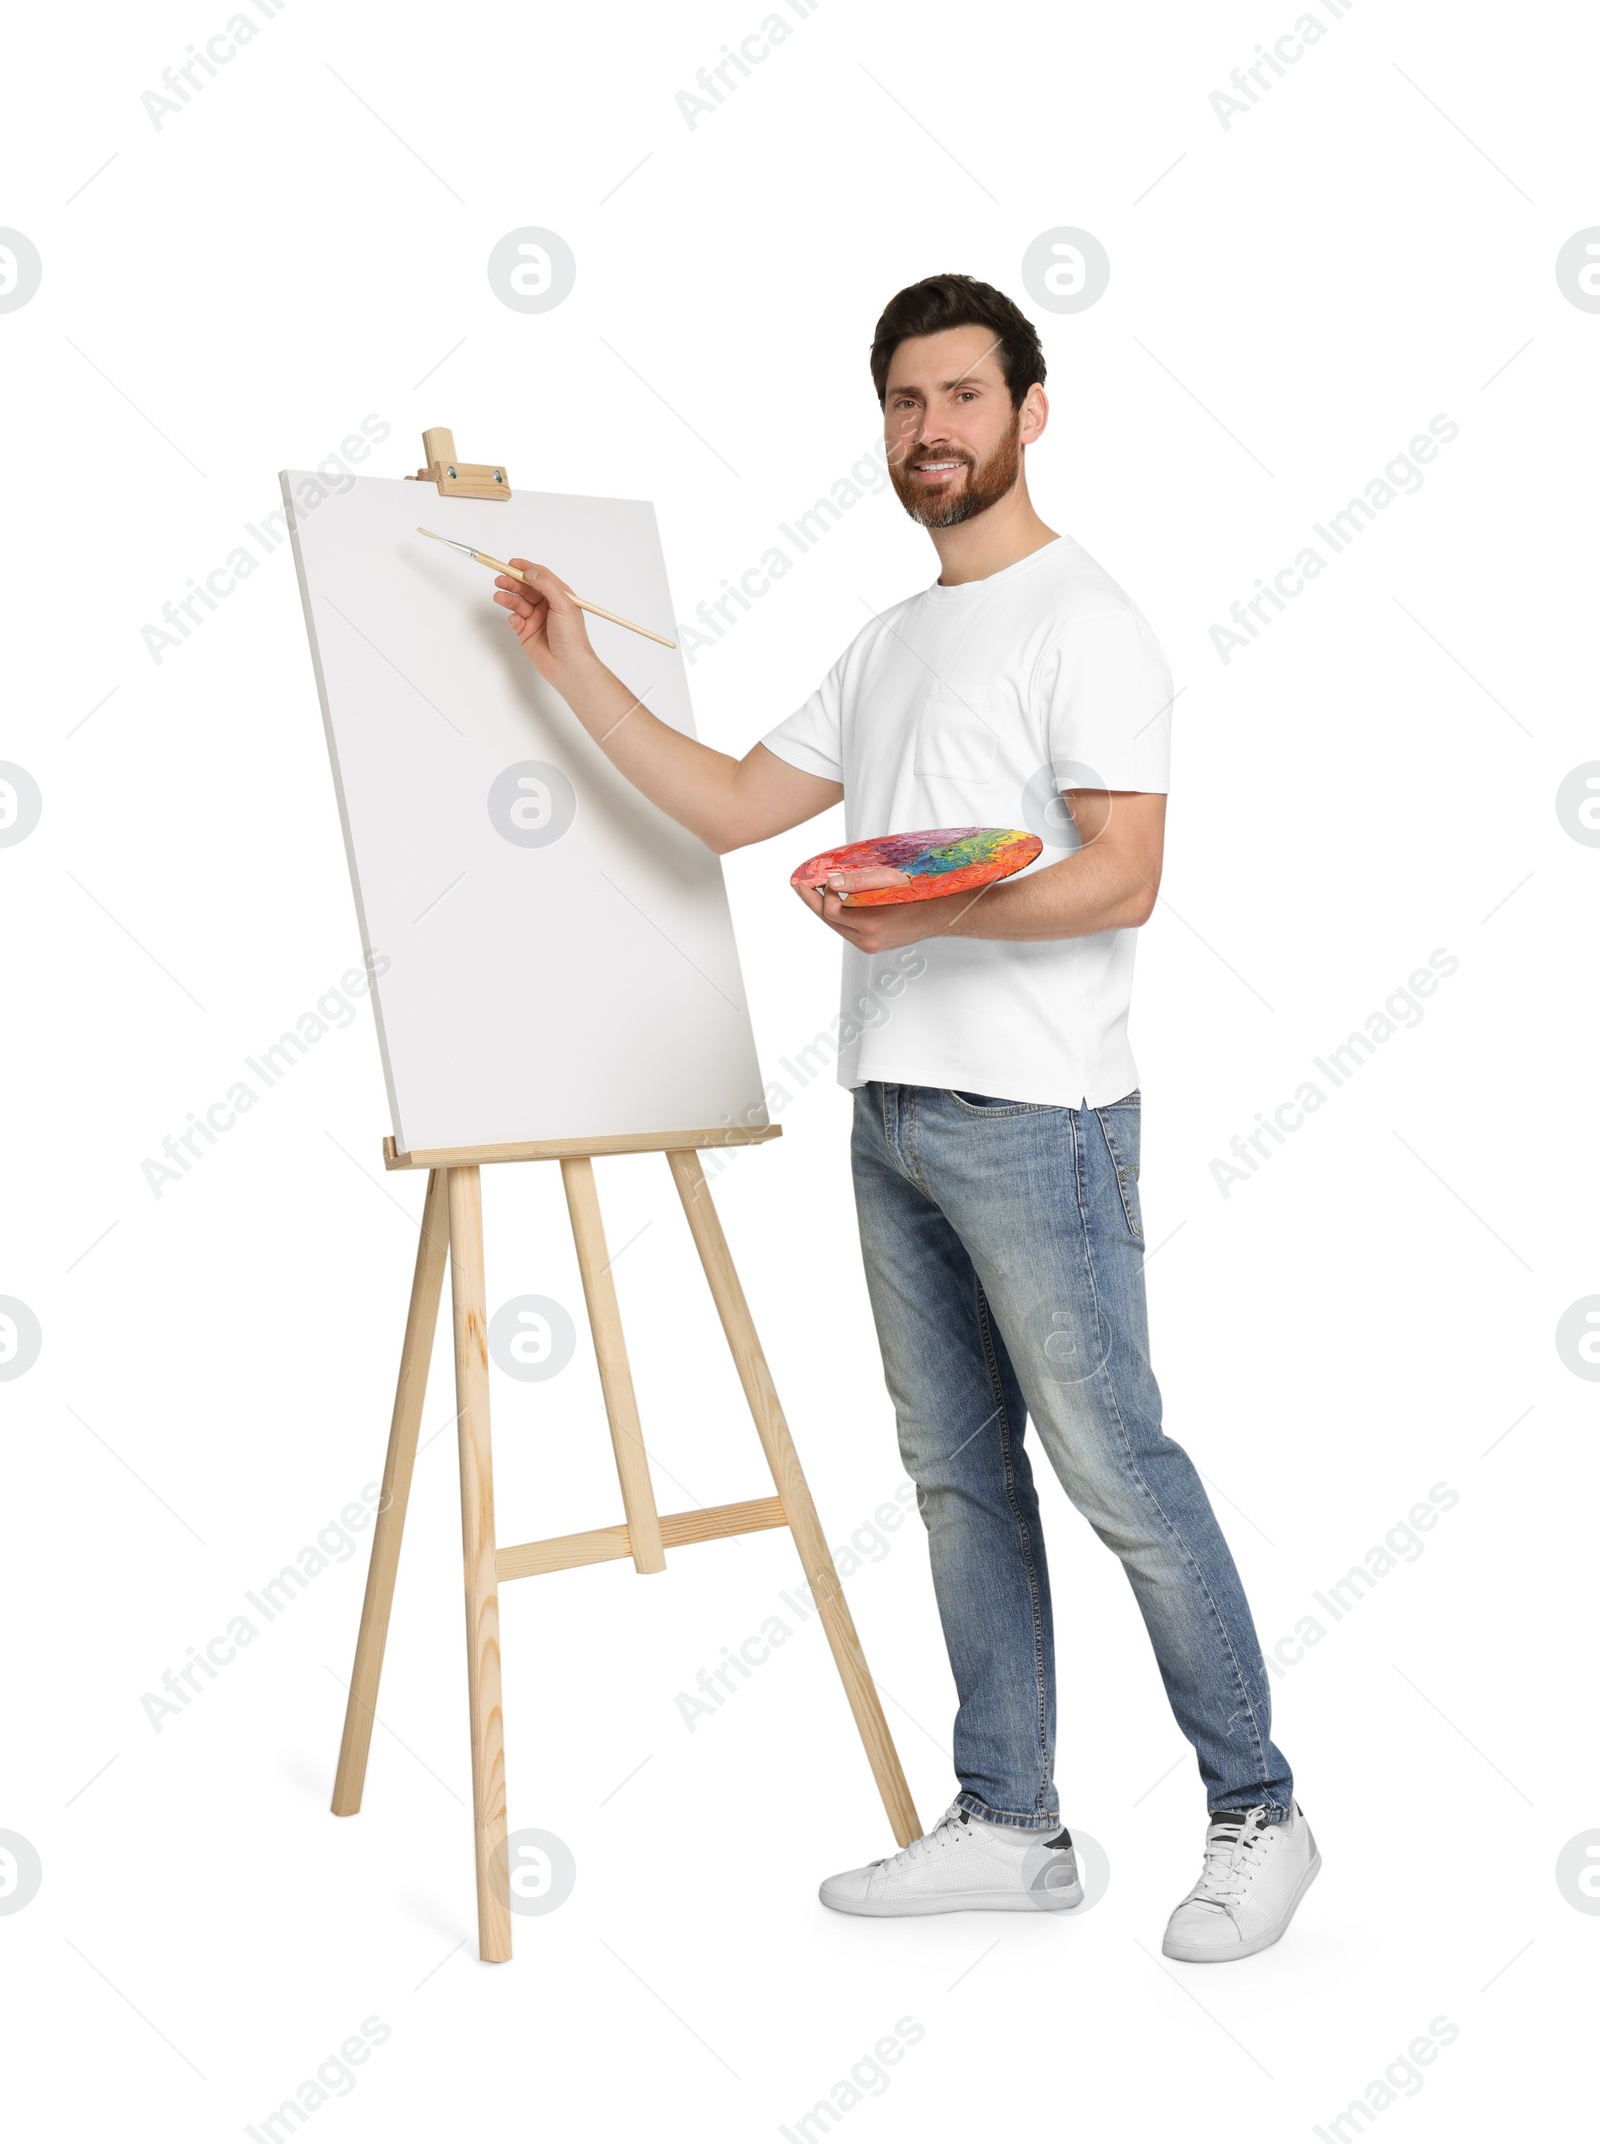 Photo of Man with brush painting against white background. Using easel to hold canvas